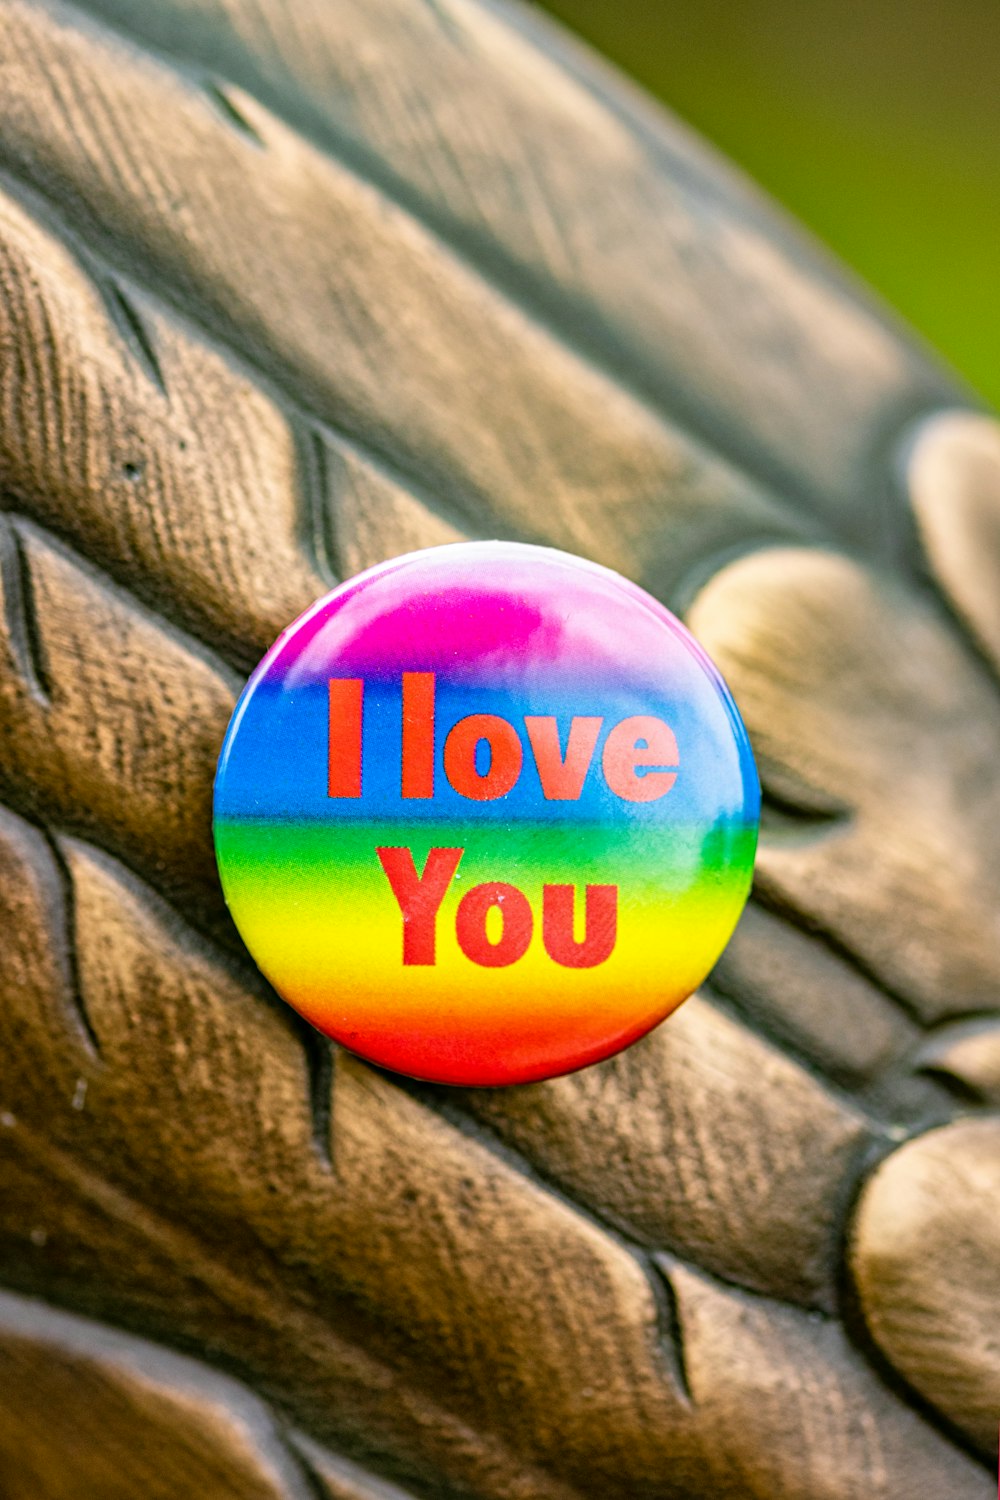 a button that says i love you on it